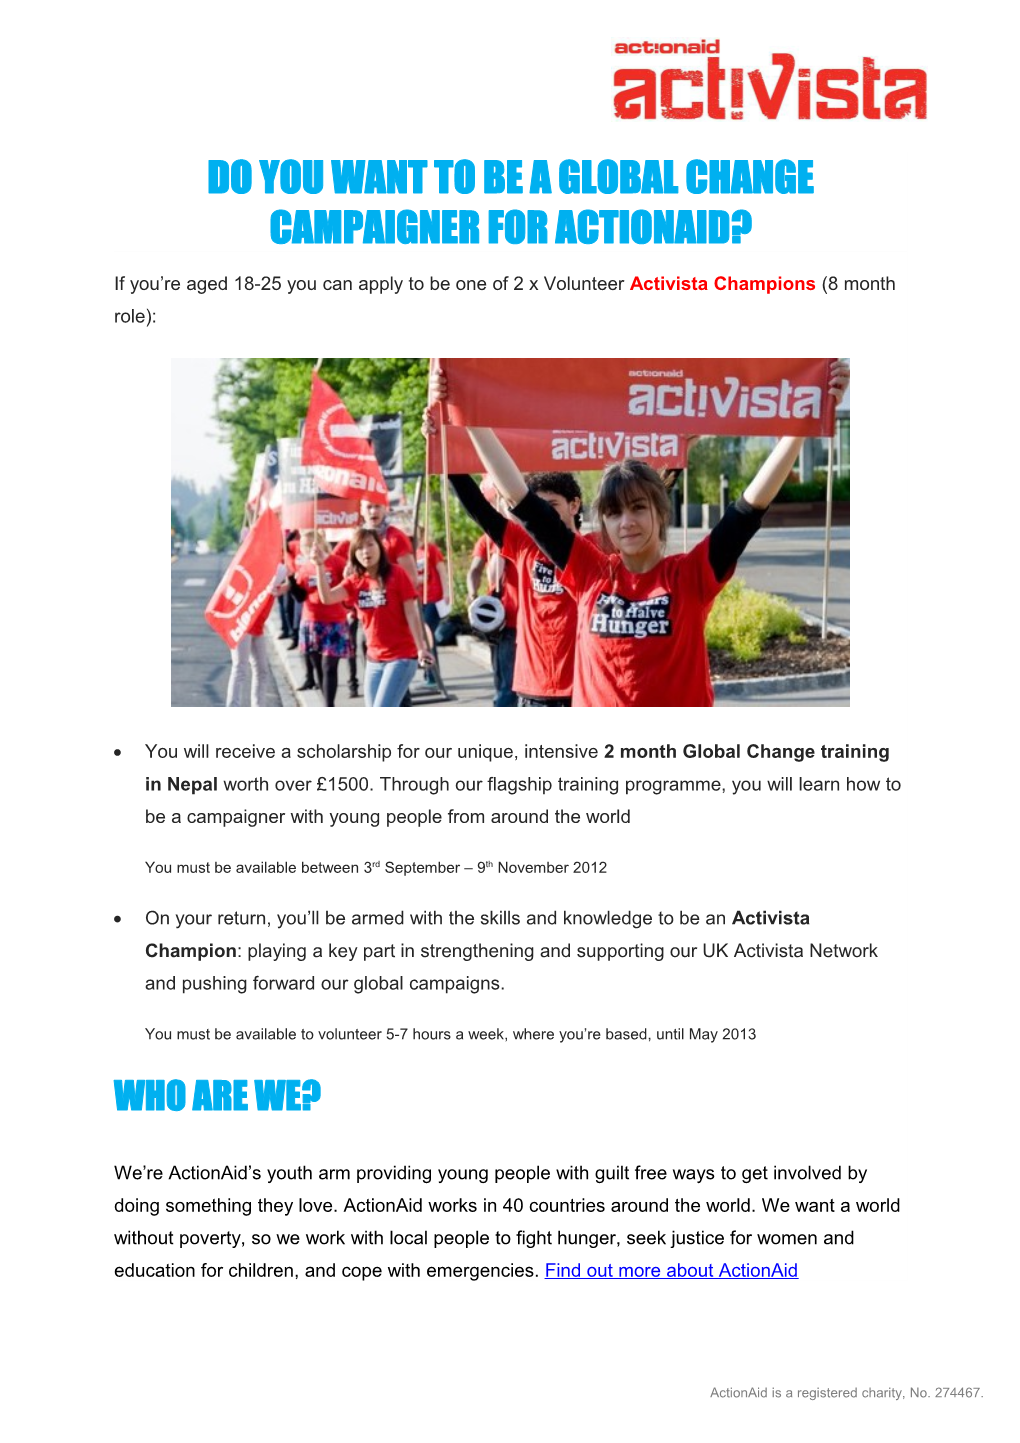 Do You Want to Be a Global Change Campaigner for Actionaid?